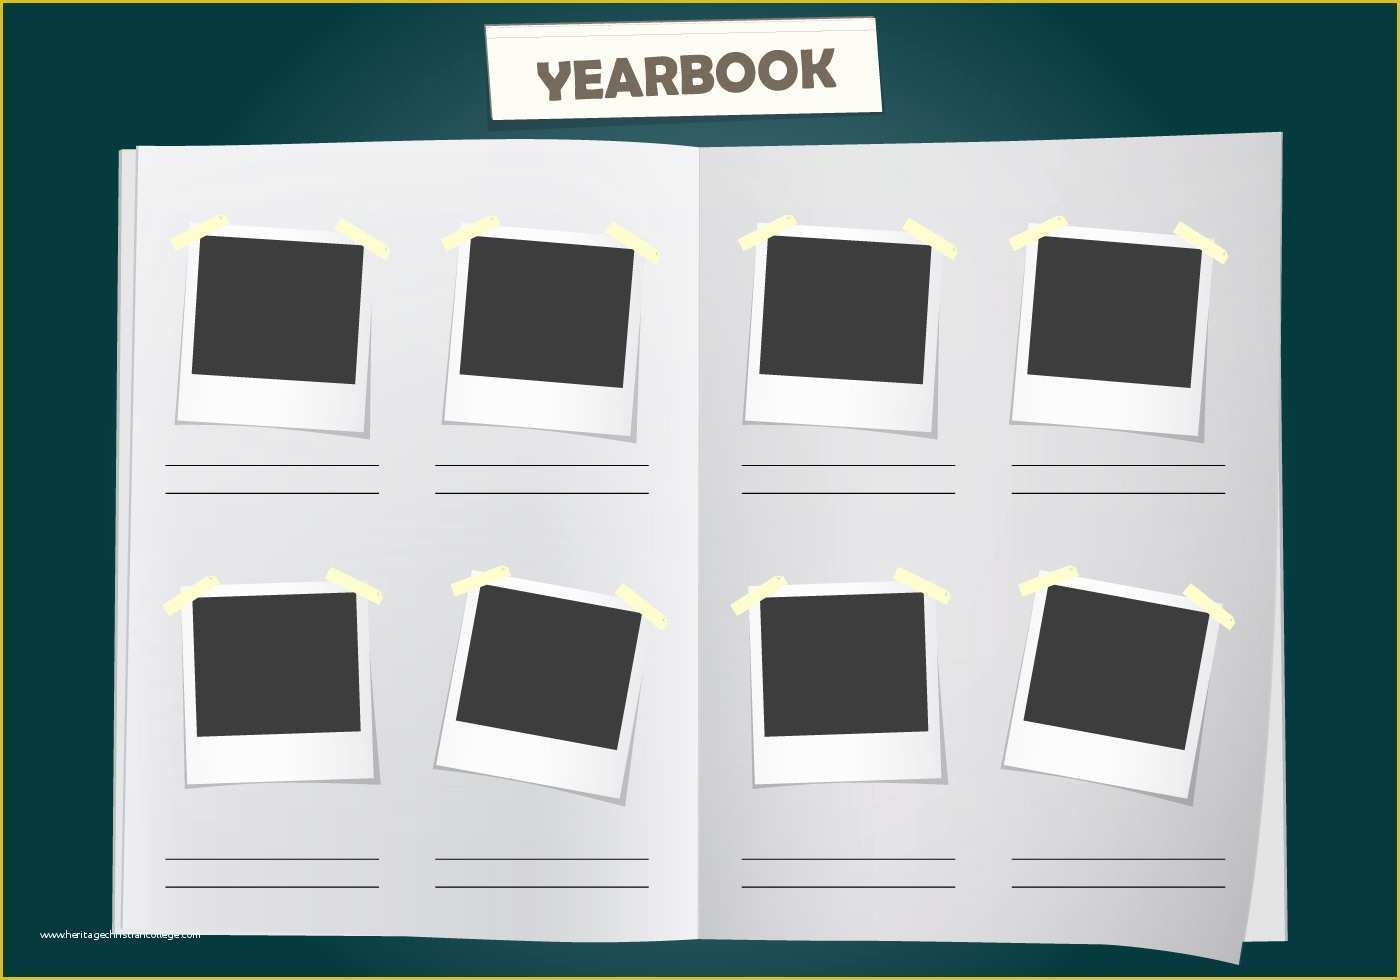 Free Indesign Yearbook Template Download Of Album Yearbook Vector Template Download Free Vector Art